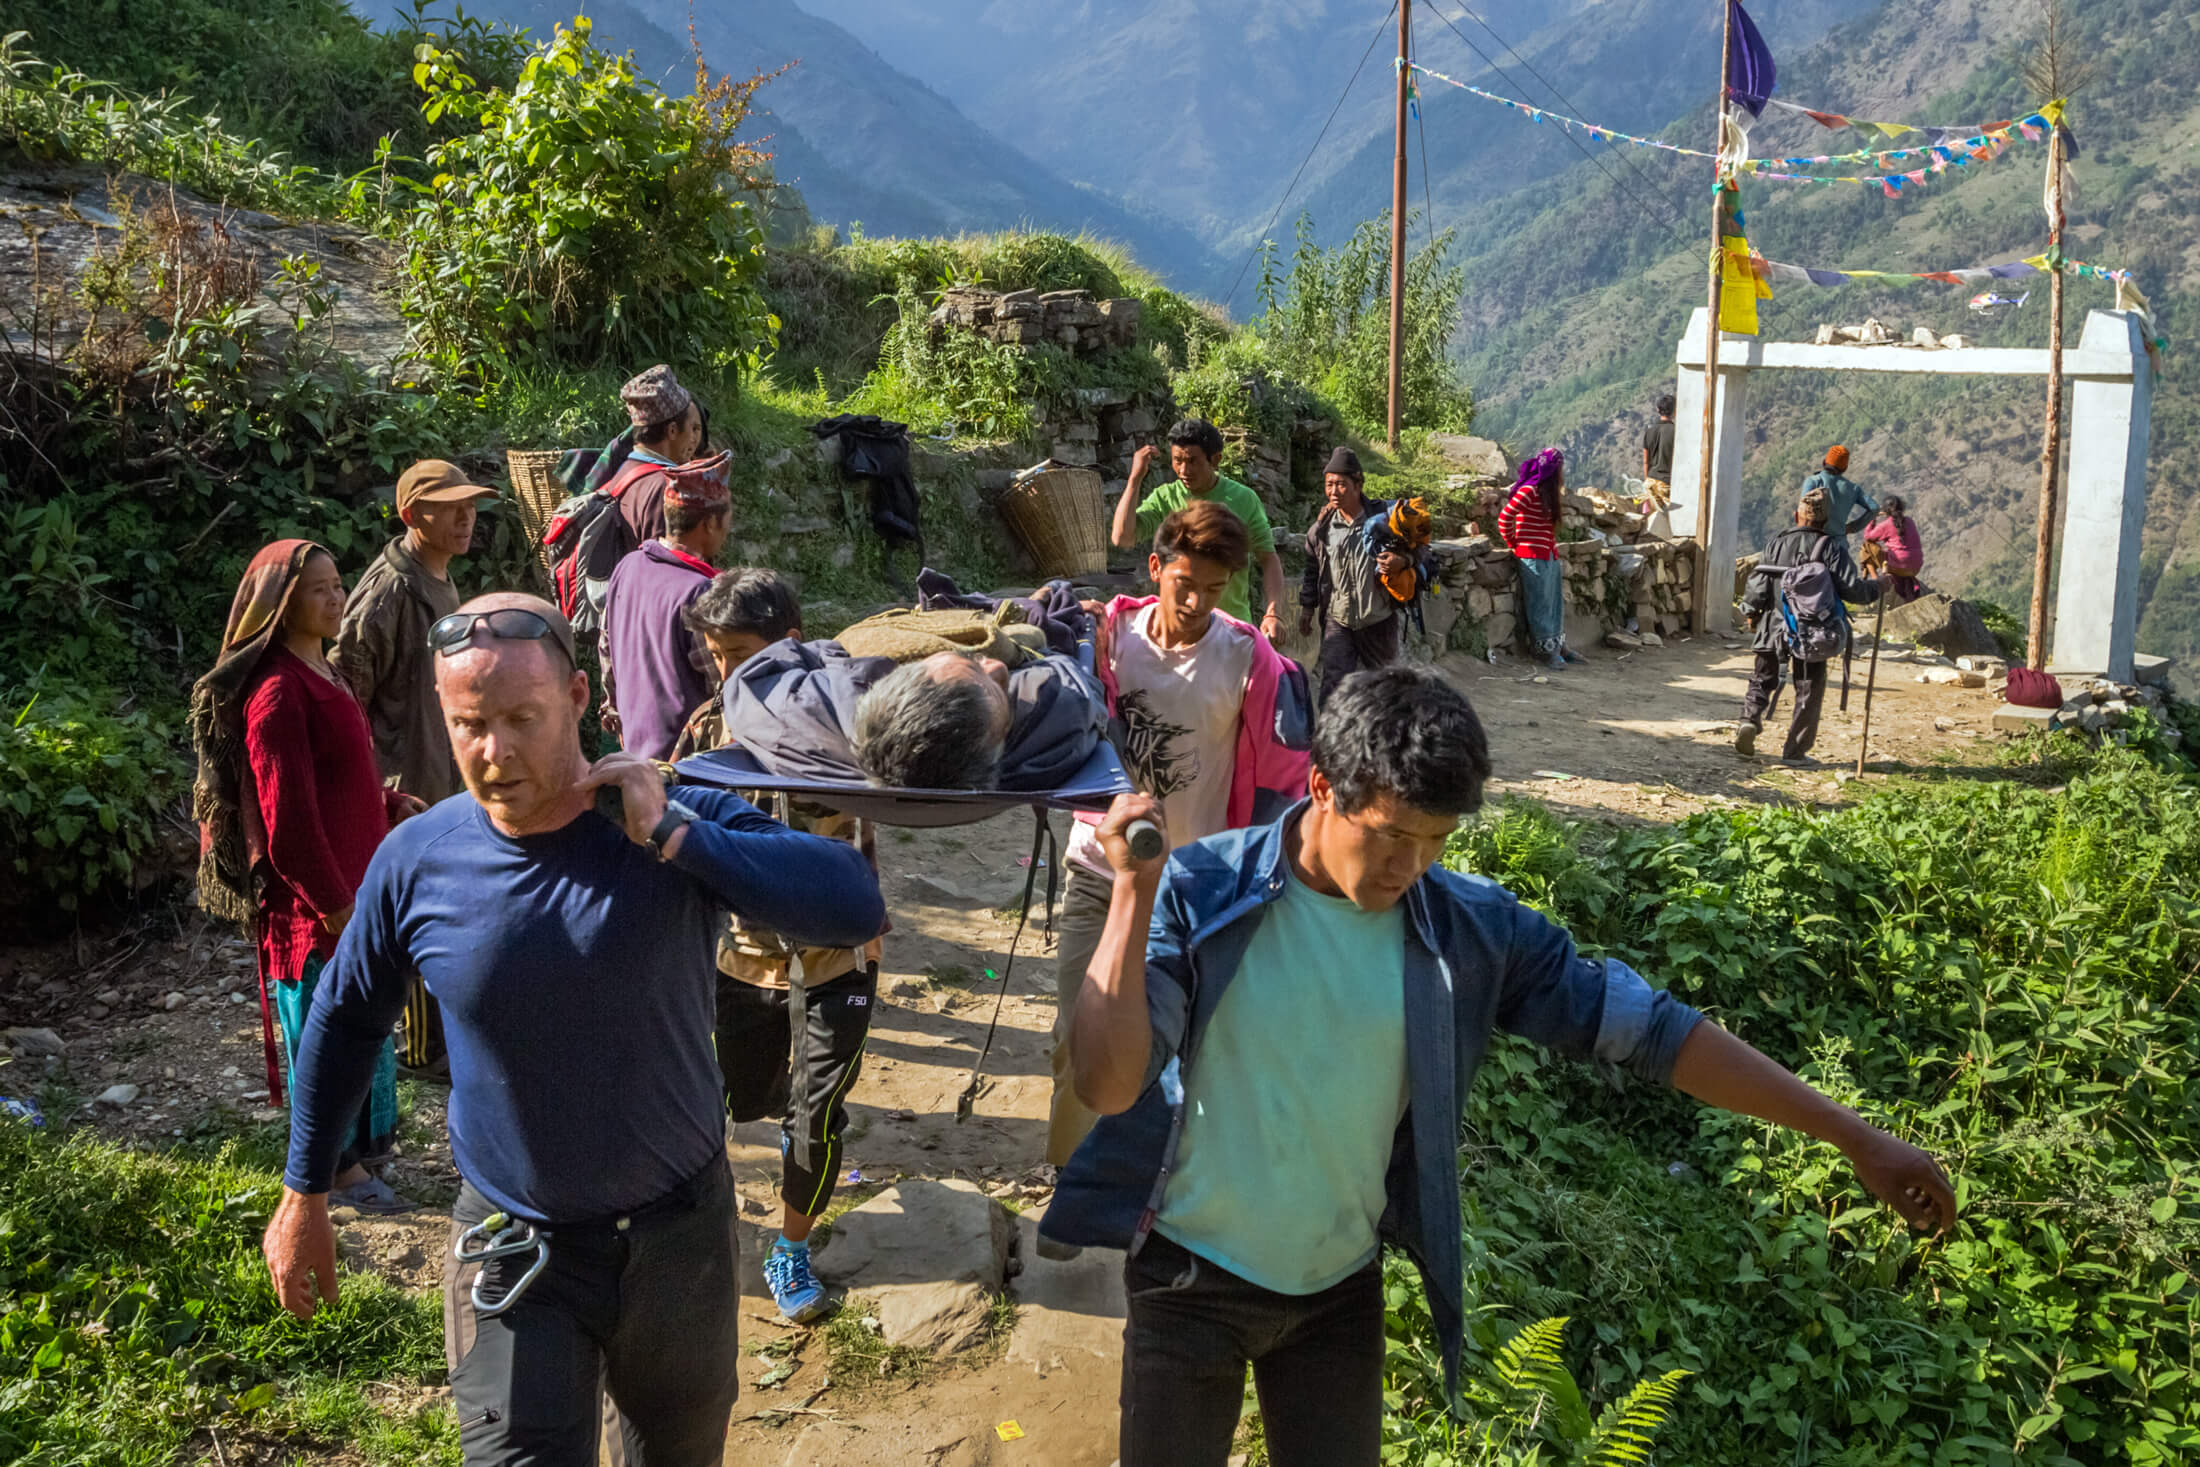 Dr. Michael Karch and a team of villagers work together to bring an injured man to safety during a rescue mission in Nepal in 2015.